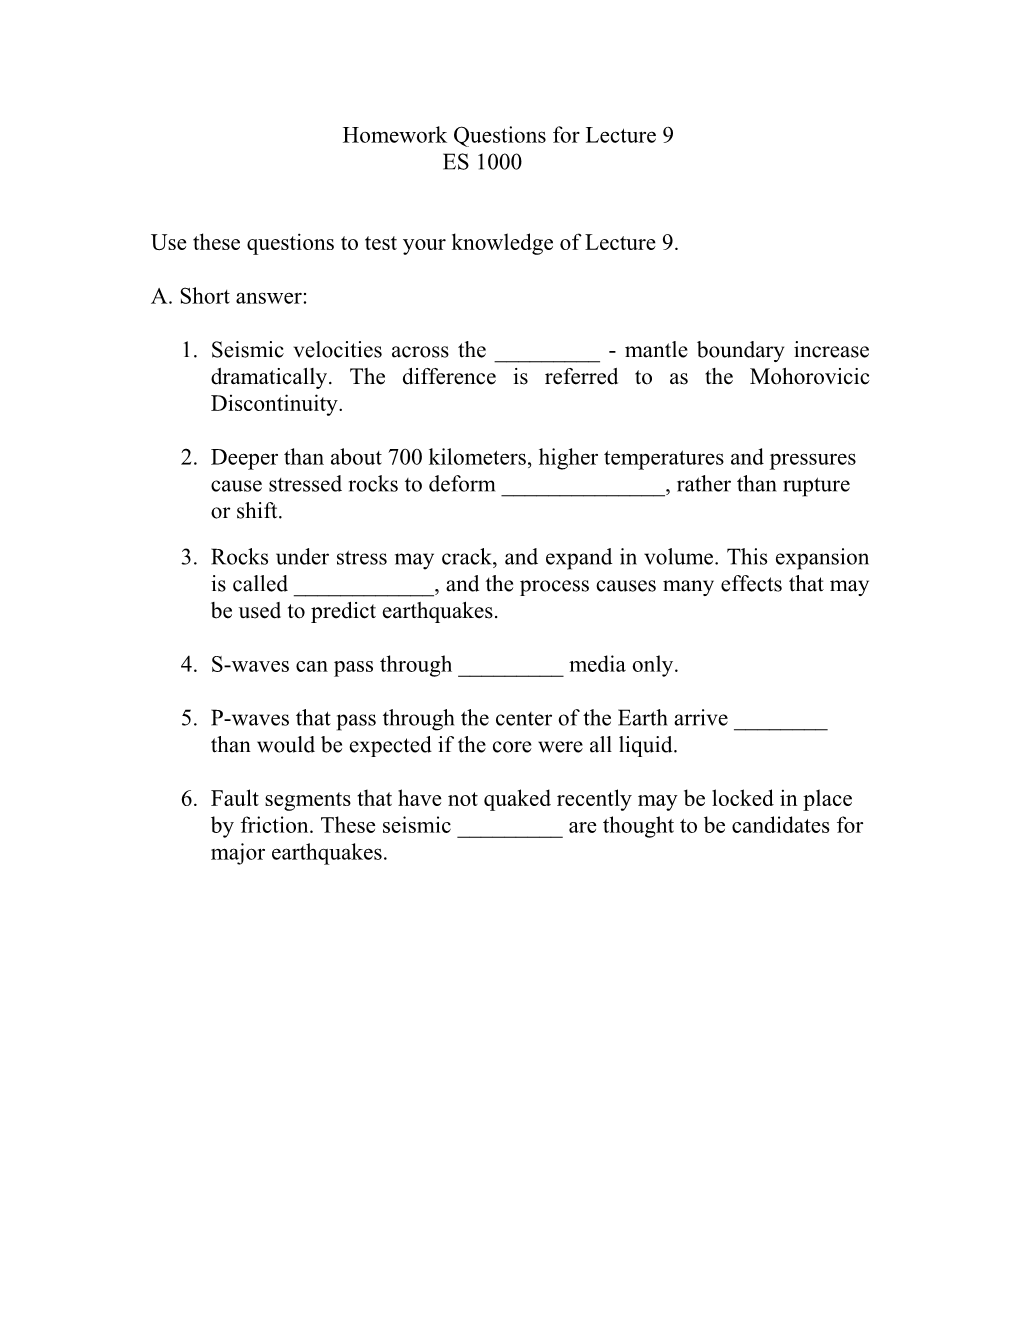 Use These Questions to Test Your Knowledge of Lecture 9